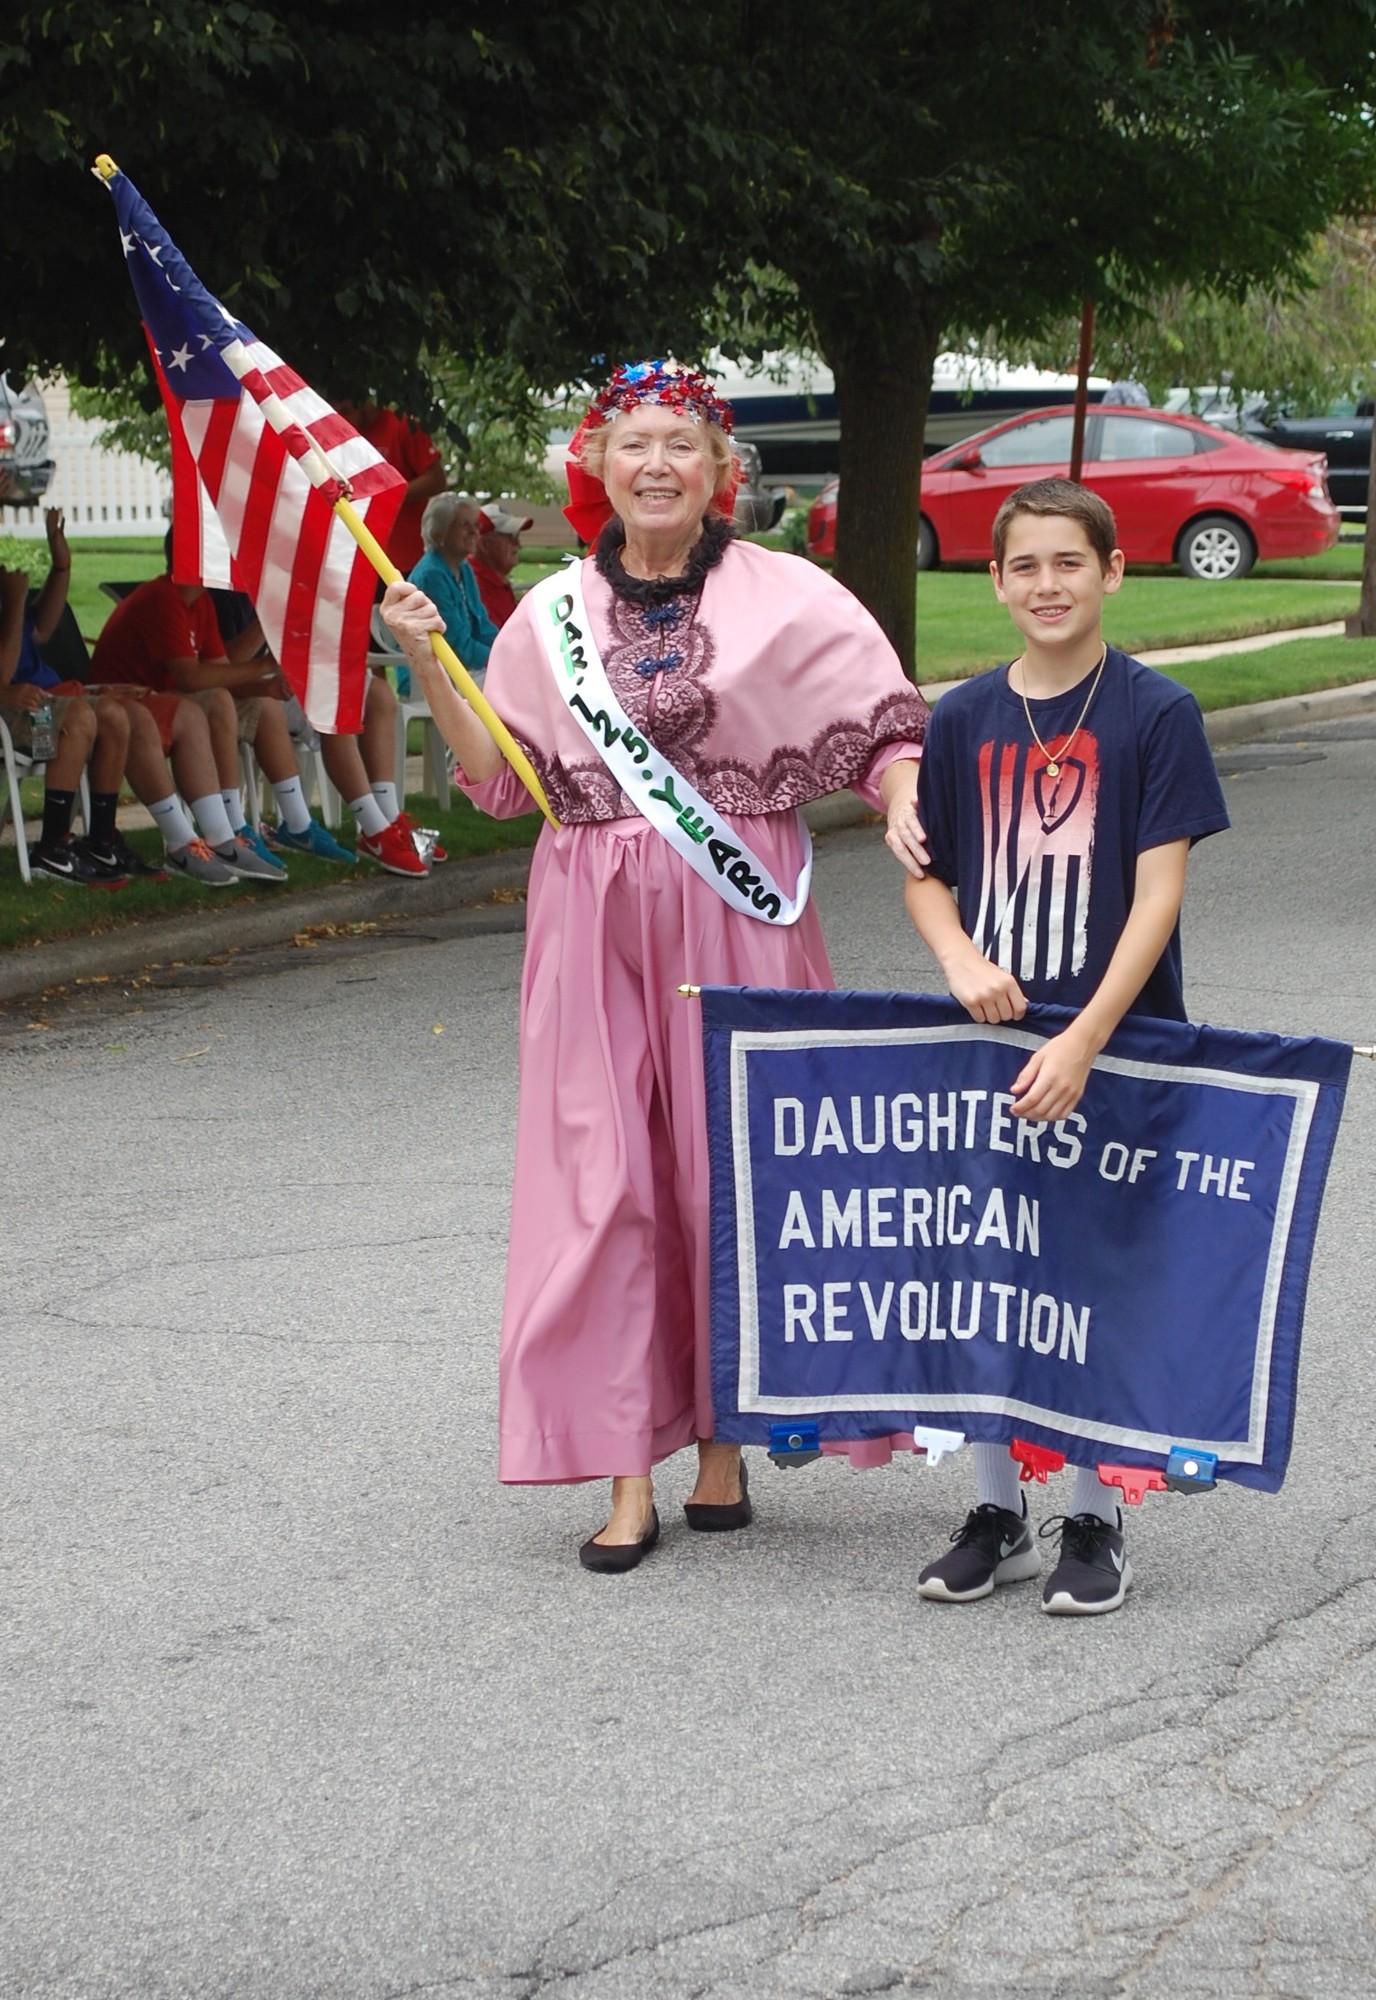 Johanna Livesay and Andrew Dougherty represented the Jerusalem Chapter of Daughters of the American Revolution.